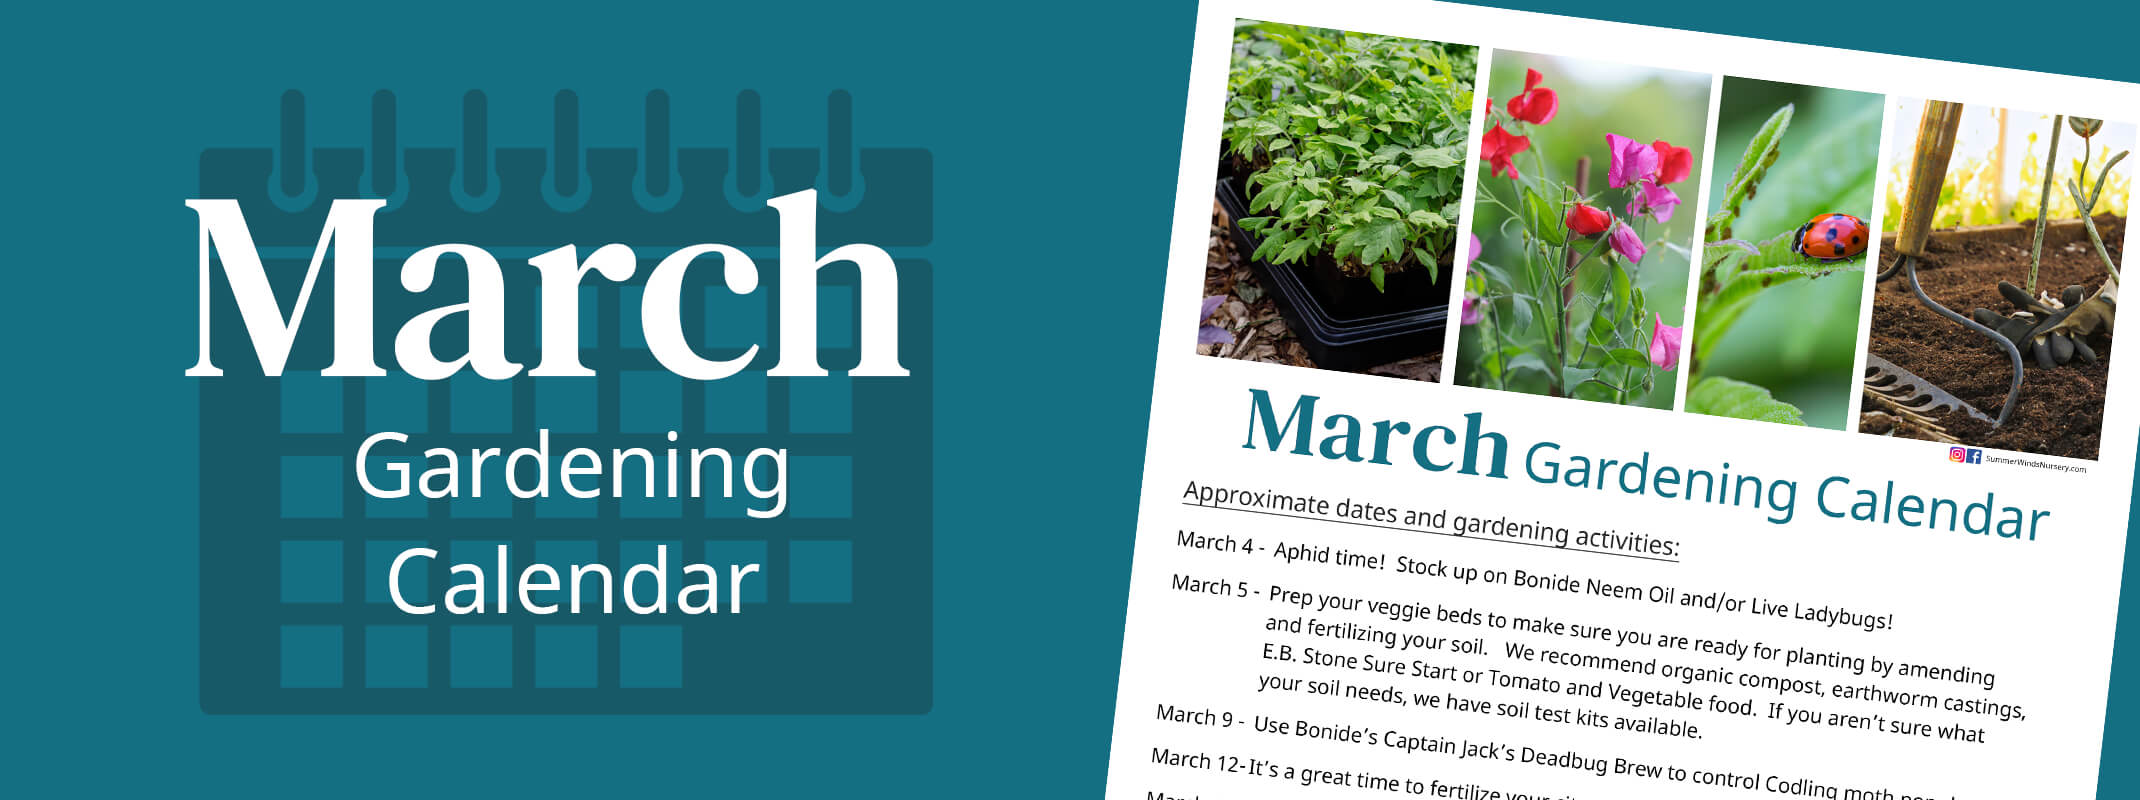 March gardening calendar banner showing the calendar on the image